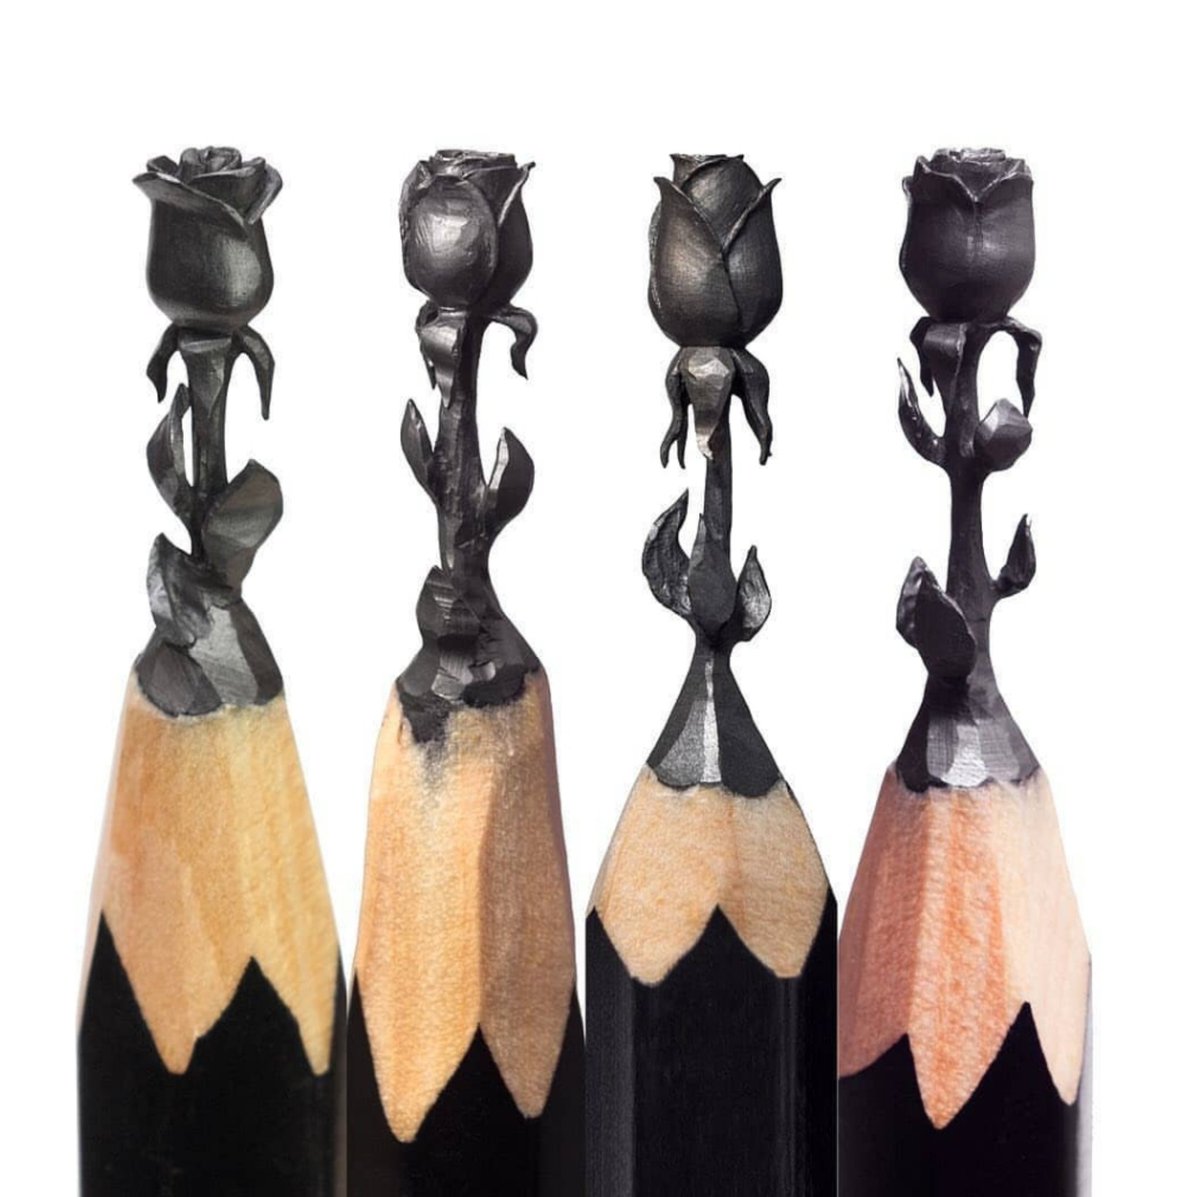 Thread of Artists With Unusual Art Mediums1. Salavat Fidai, Russian sculptor who makes stunning miniature sculptures out of pencil graphite